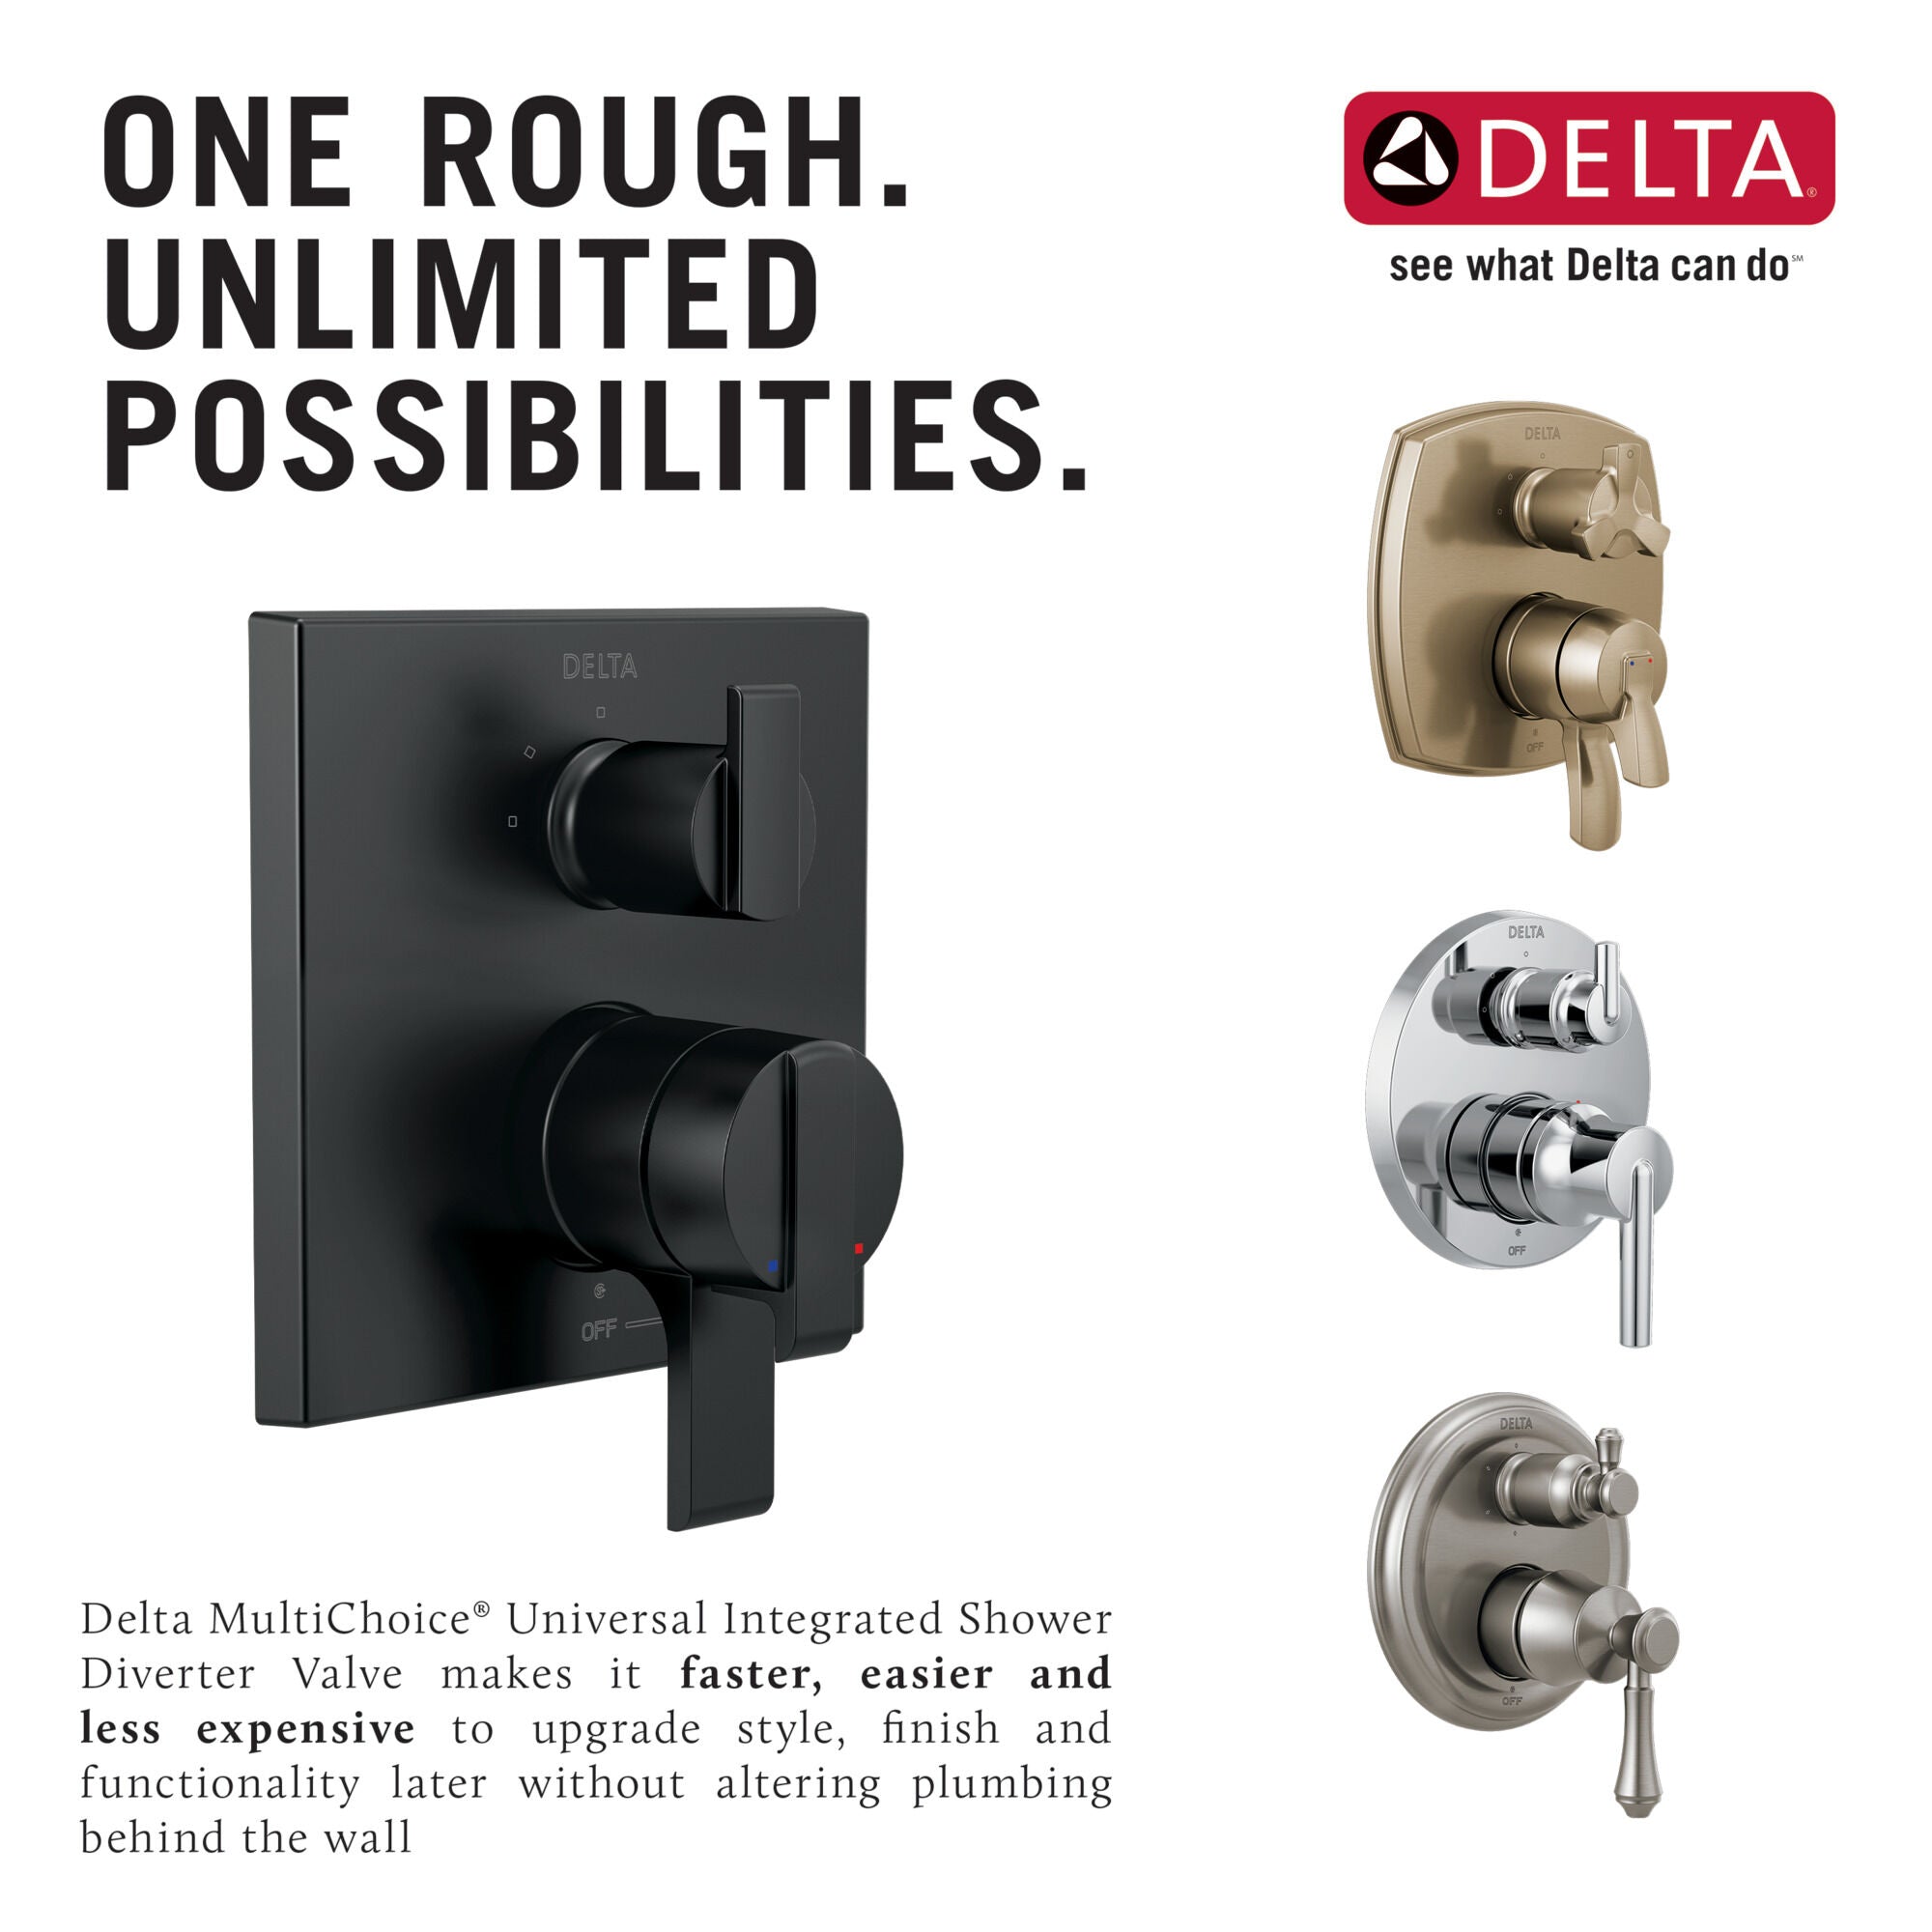 Delta MultiChoice Integrated Shower Diverter Rough Universal Inlets / Outlets